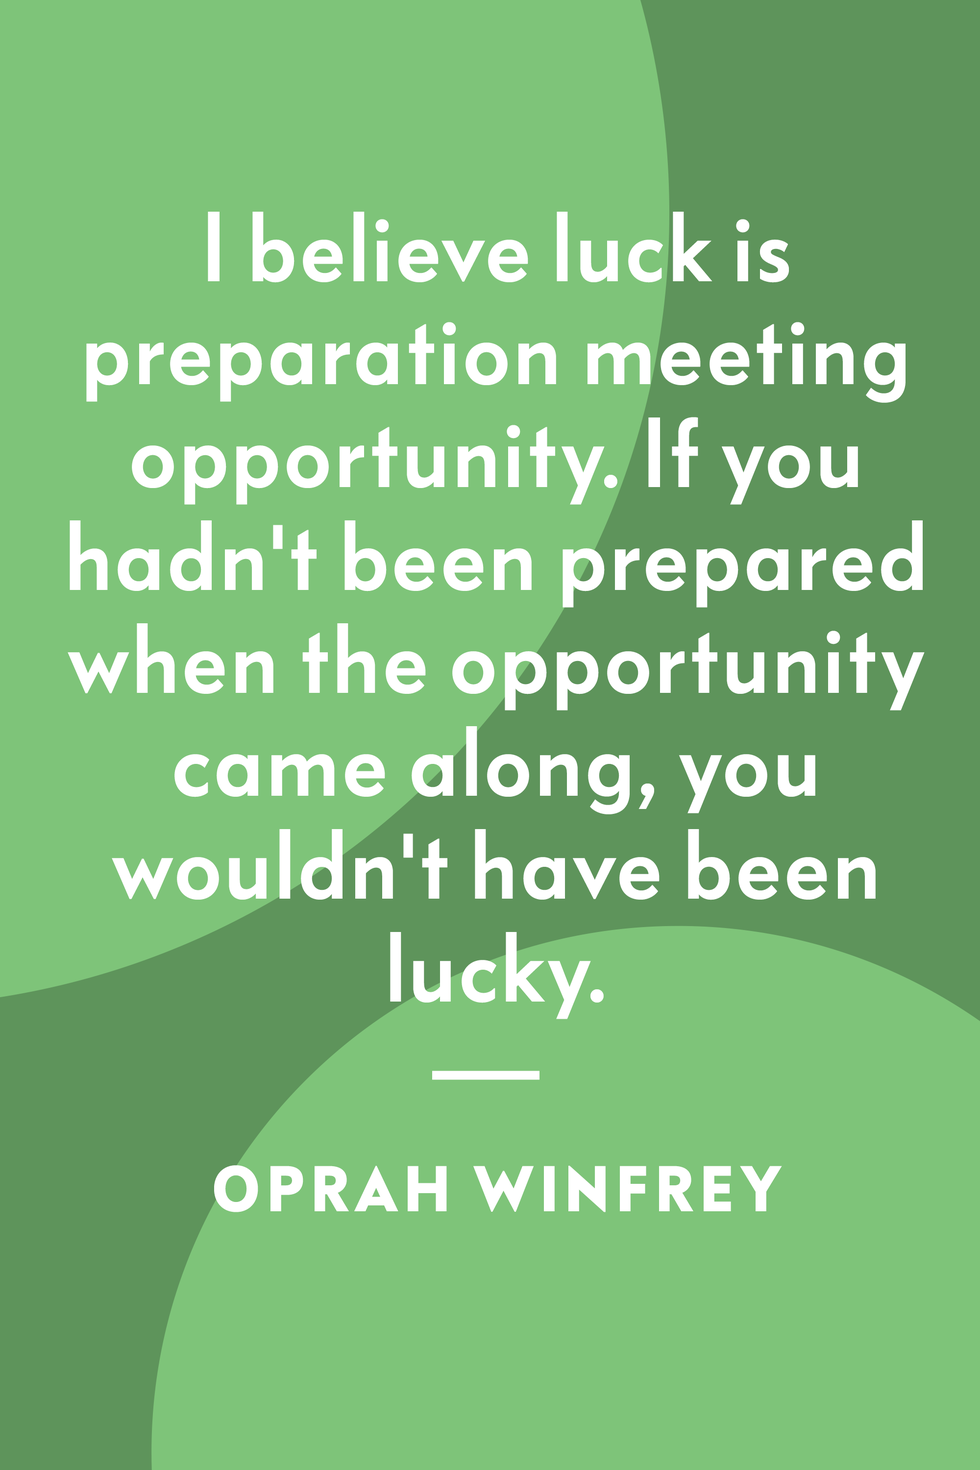 Quotes About Good Luck For St. Patrick's Day 2020